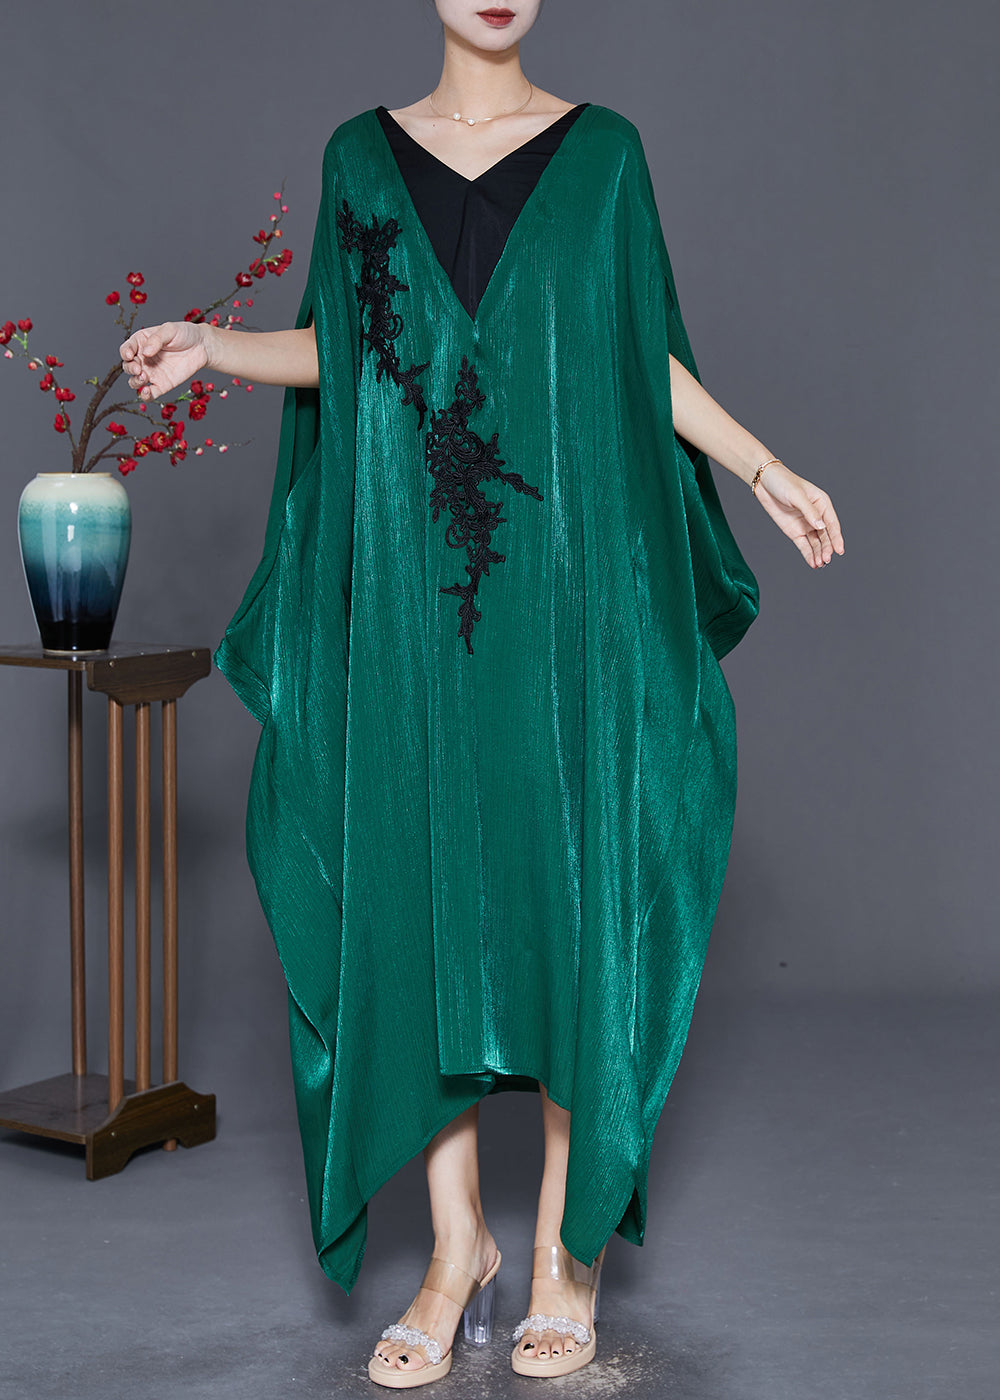 Style Blackish Green Embroideried Patchwork Silk Long Dresses Batwing Sleeve